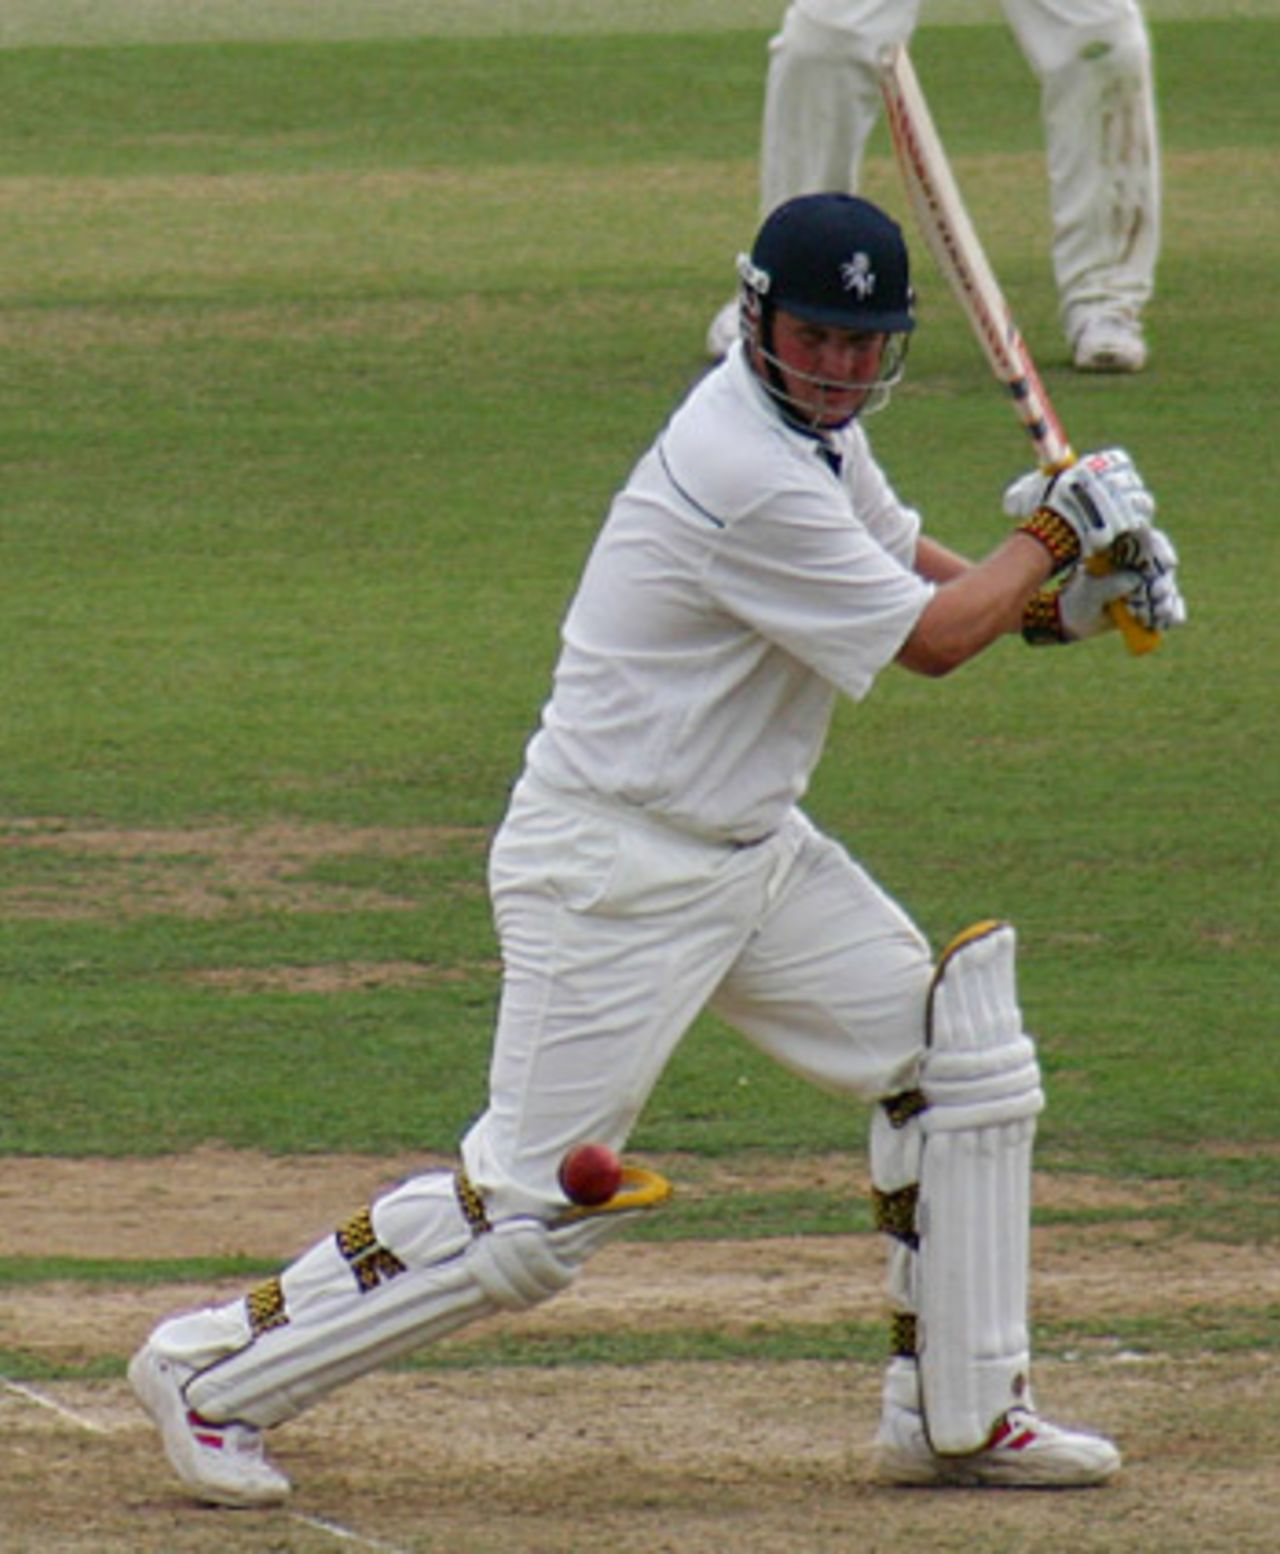 Rob Key on his way to 94, Middlesex v Kent, Lord's, September 7, 2005